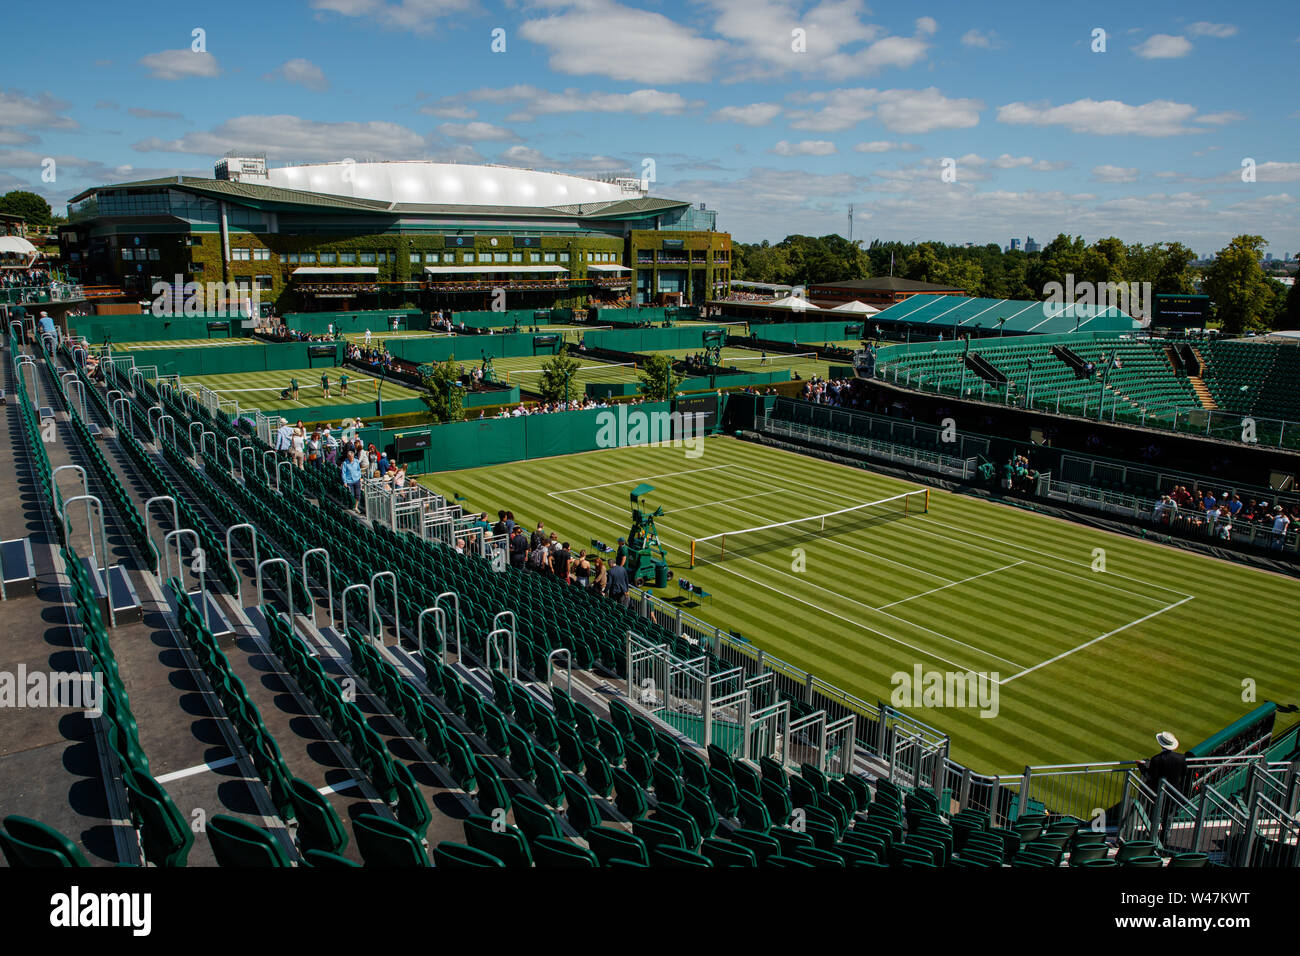 General View of Centre Court and Court 12 at The Wimbledon Championships 2019. Held at The All England Lawn Tennis Club, Wimbledon. Stock Photo